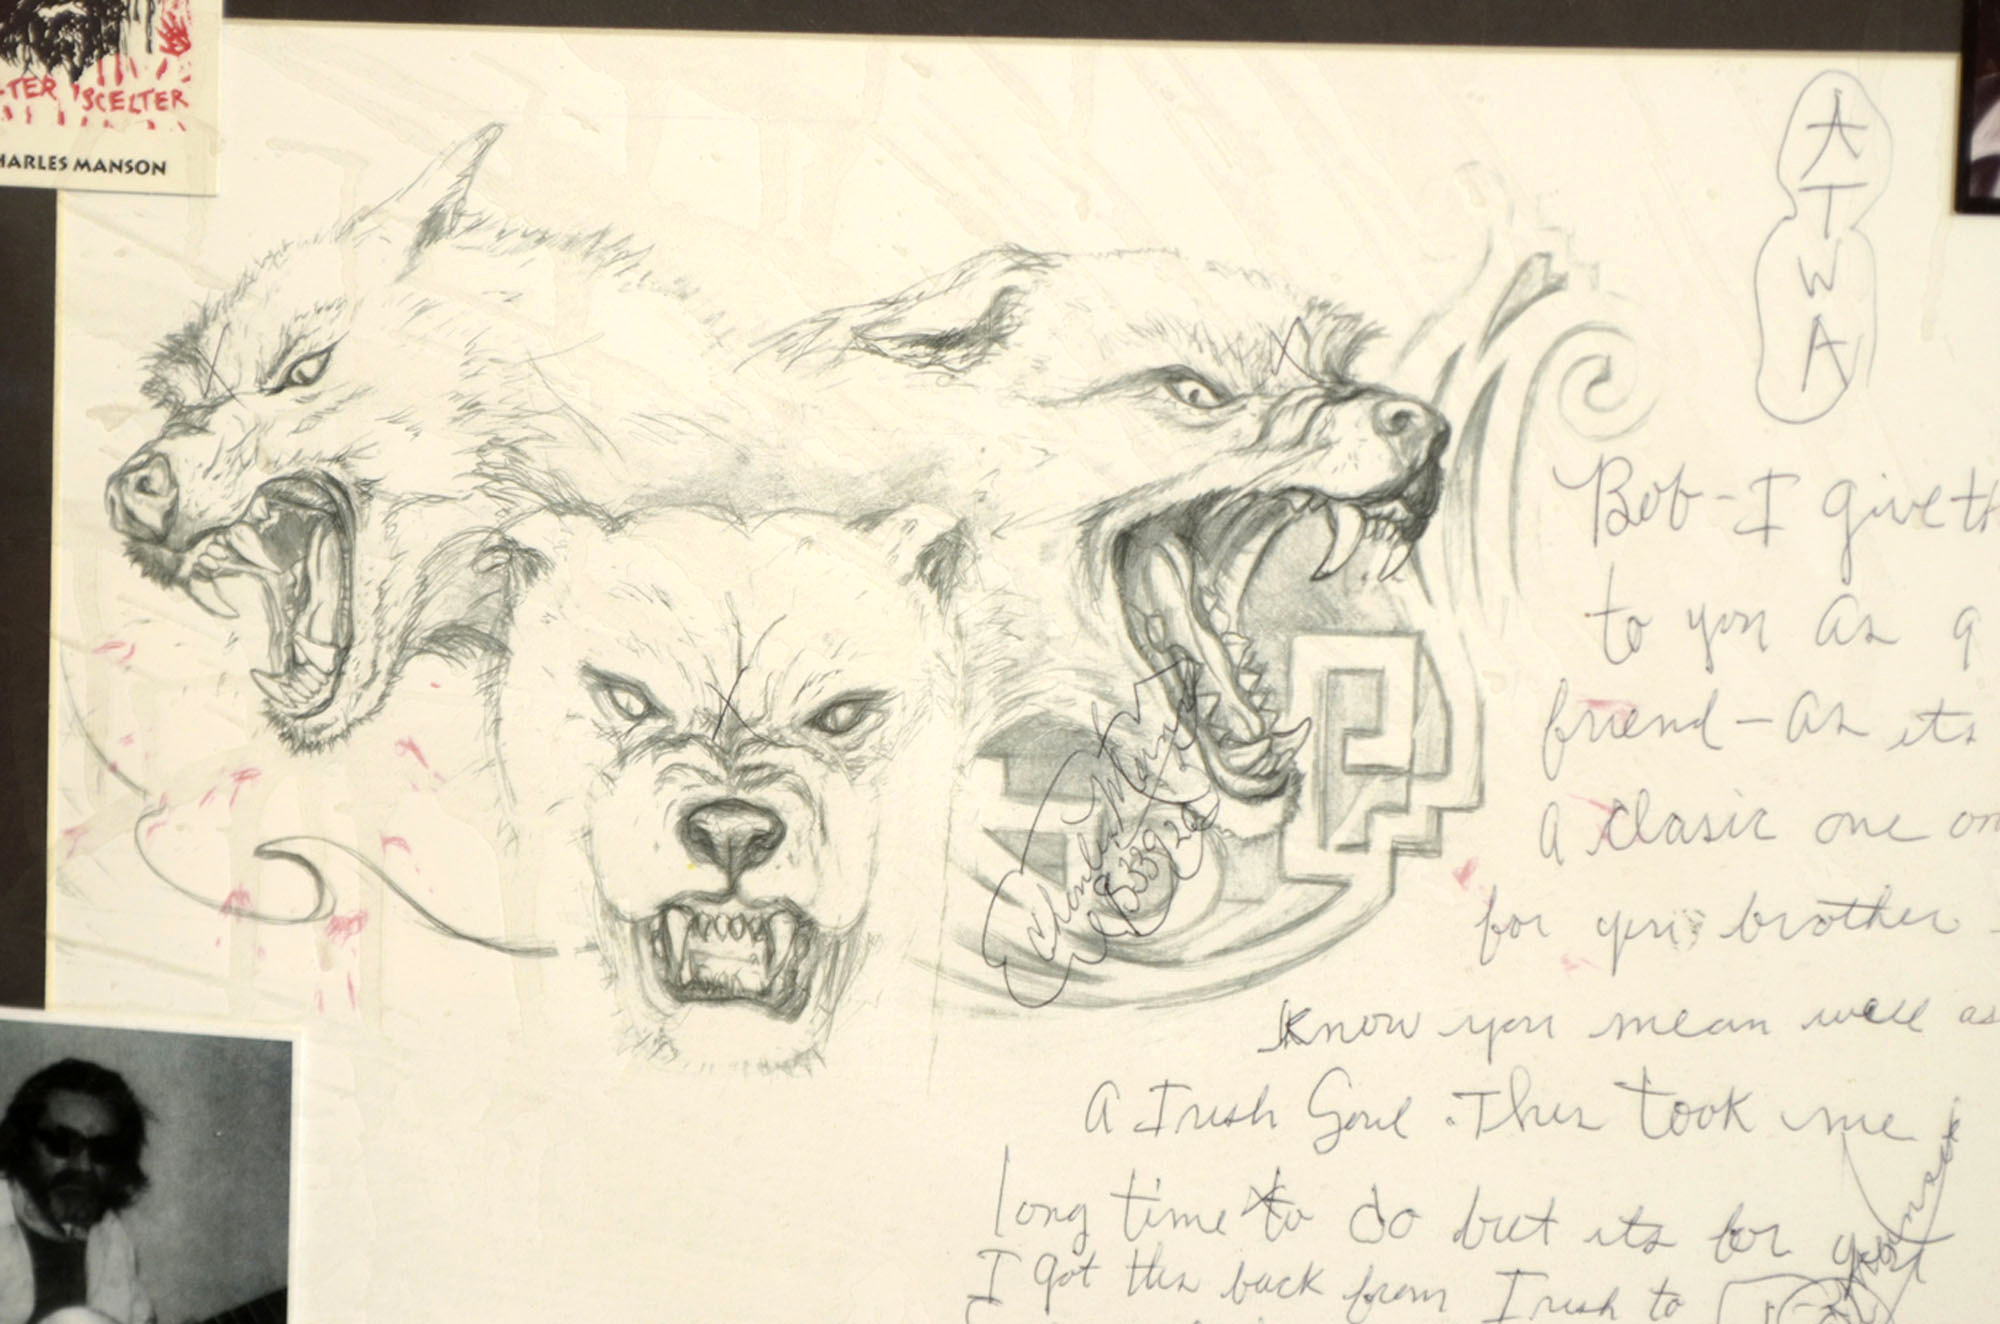 PHOTO: A piece of artwork from Charles Manson to Bob George in Dodge City, Kan.